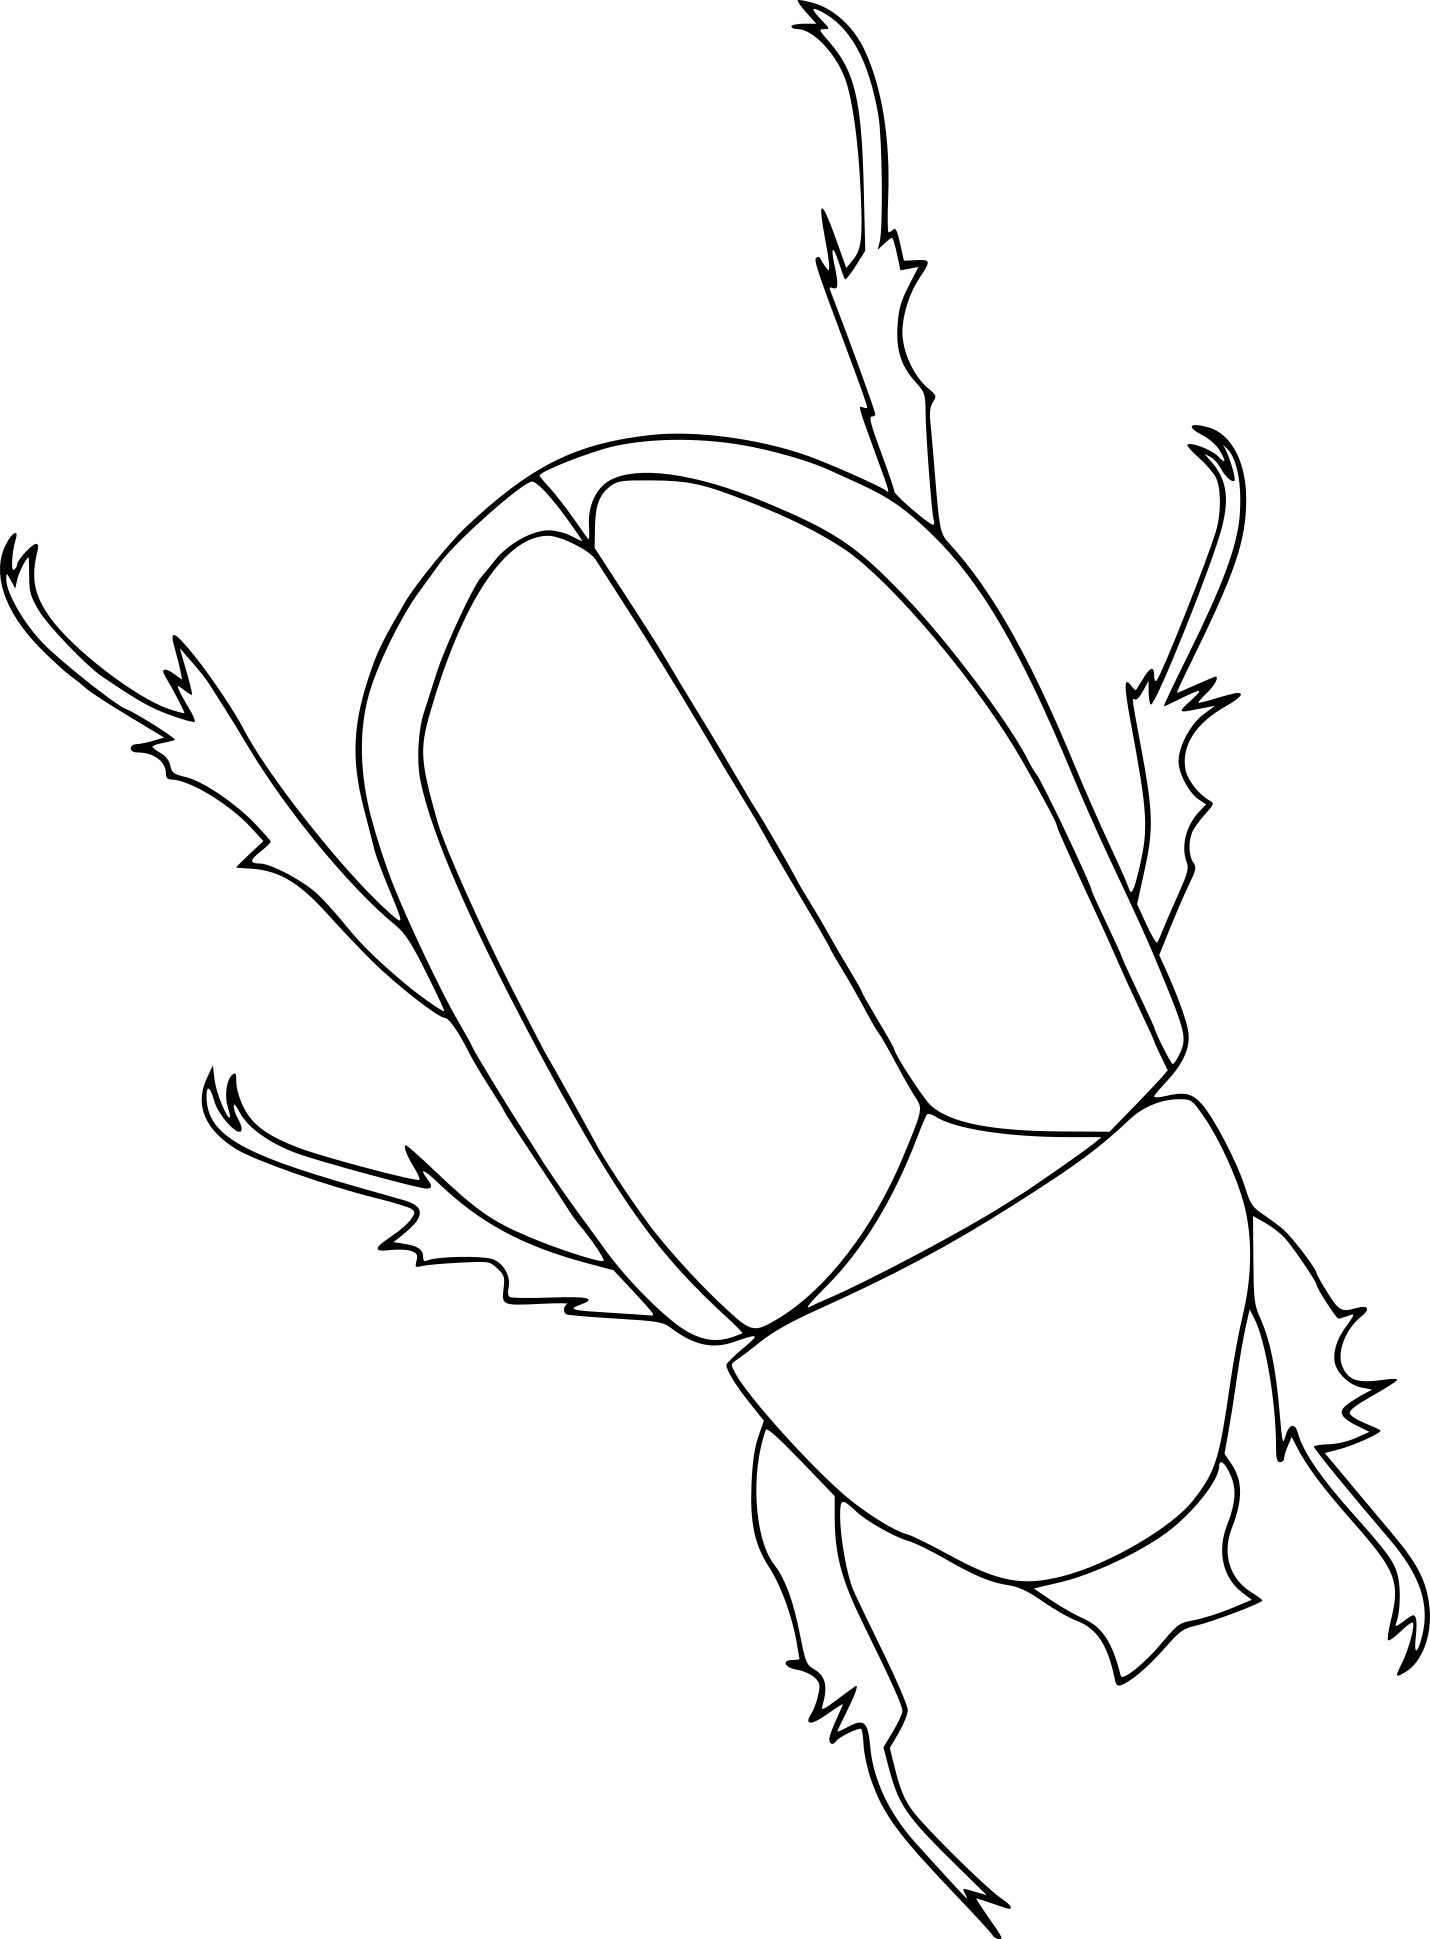 Beetle drawing and coloring page